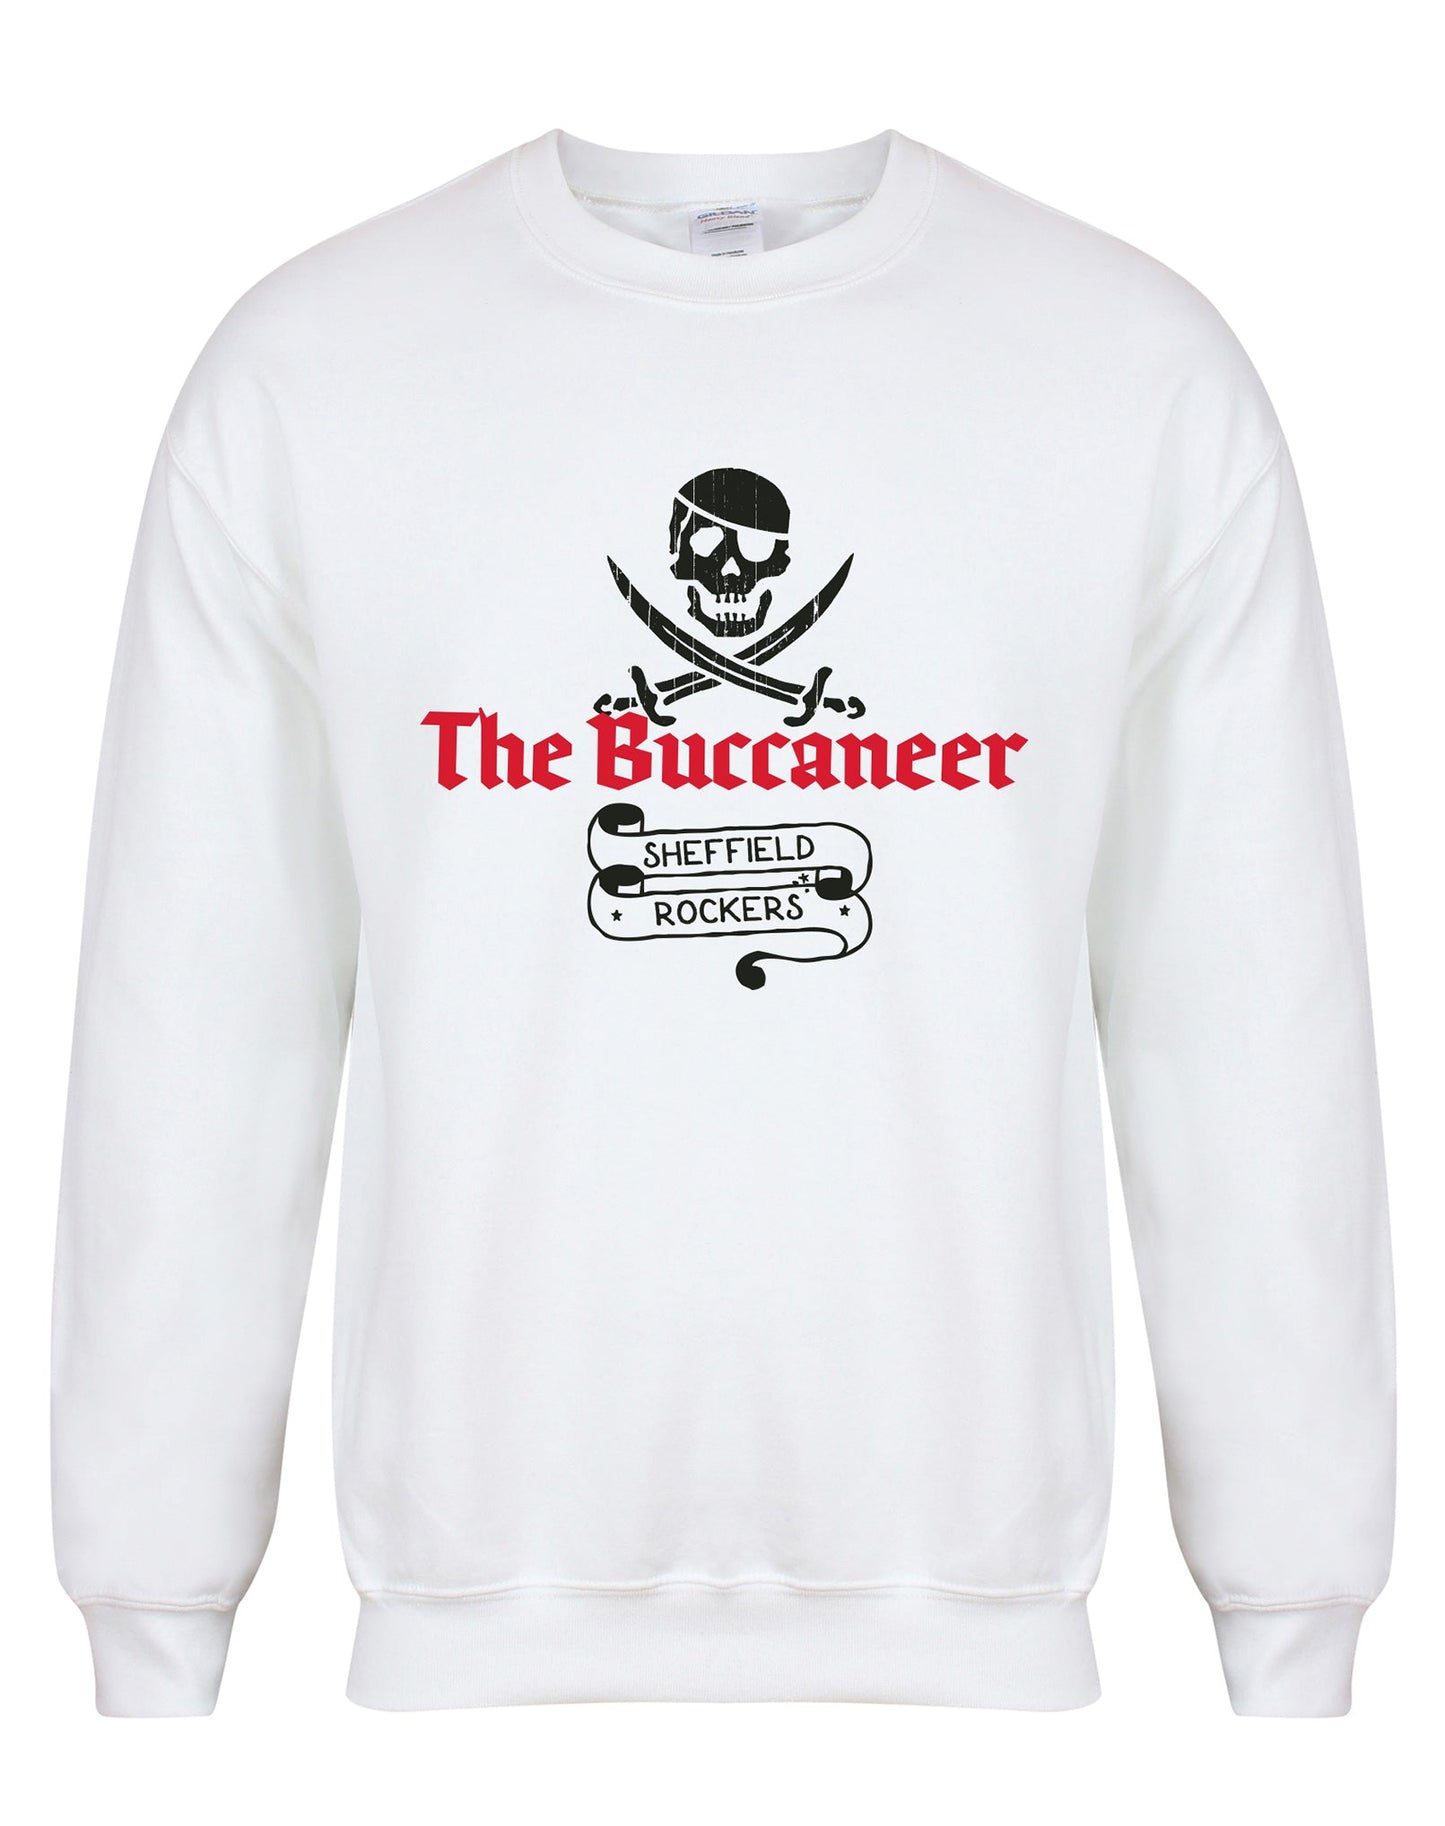 Buccaneer unisex fit sweatshirt - various colours - Dirty Stop Outs